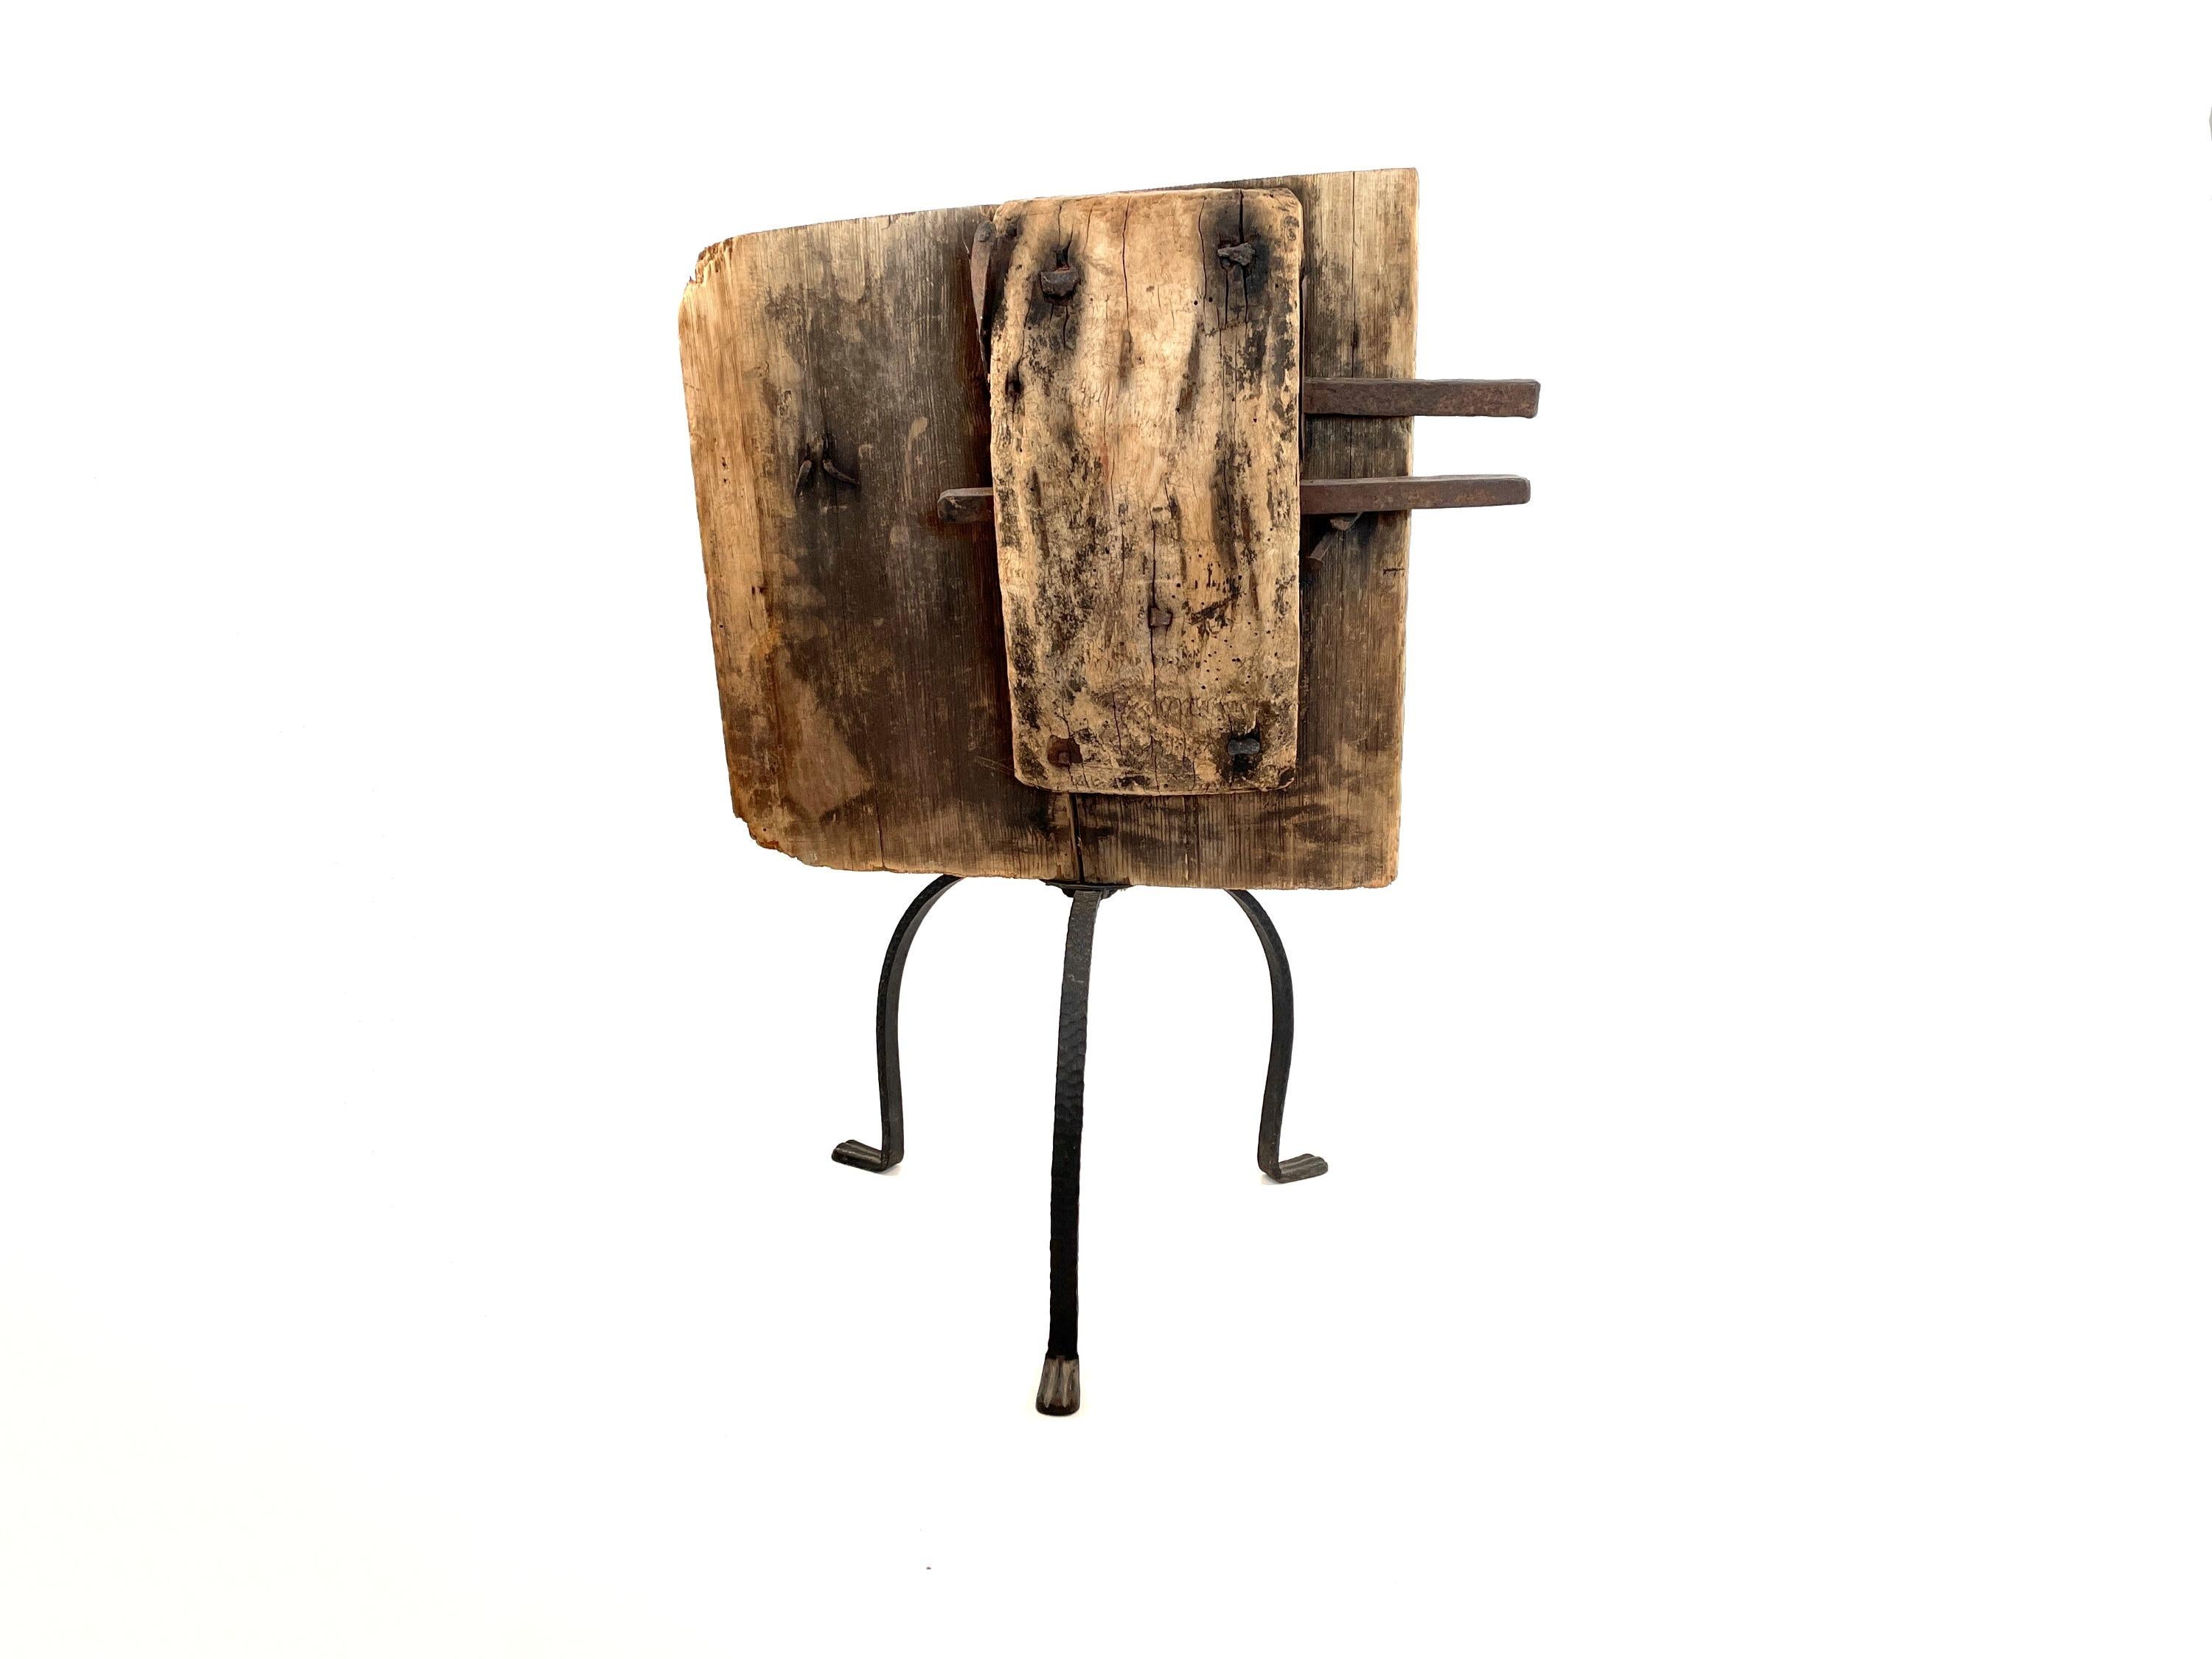 Experience the rustic allure of this Brutalist Woodbox Door Lock Sculpture, a creation by an unknown Finnish artist. The wooden door lock is from the 1600s. Its brutalist aesthetic exudes a raw authenticity, bestowing a distinctive character upon